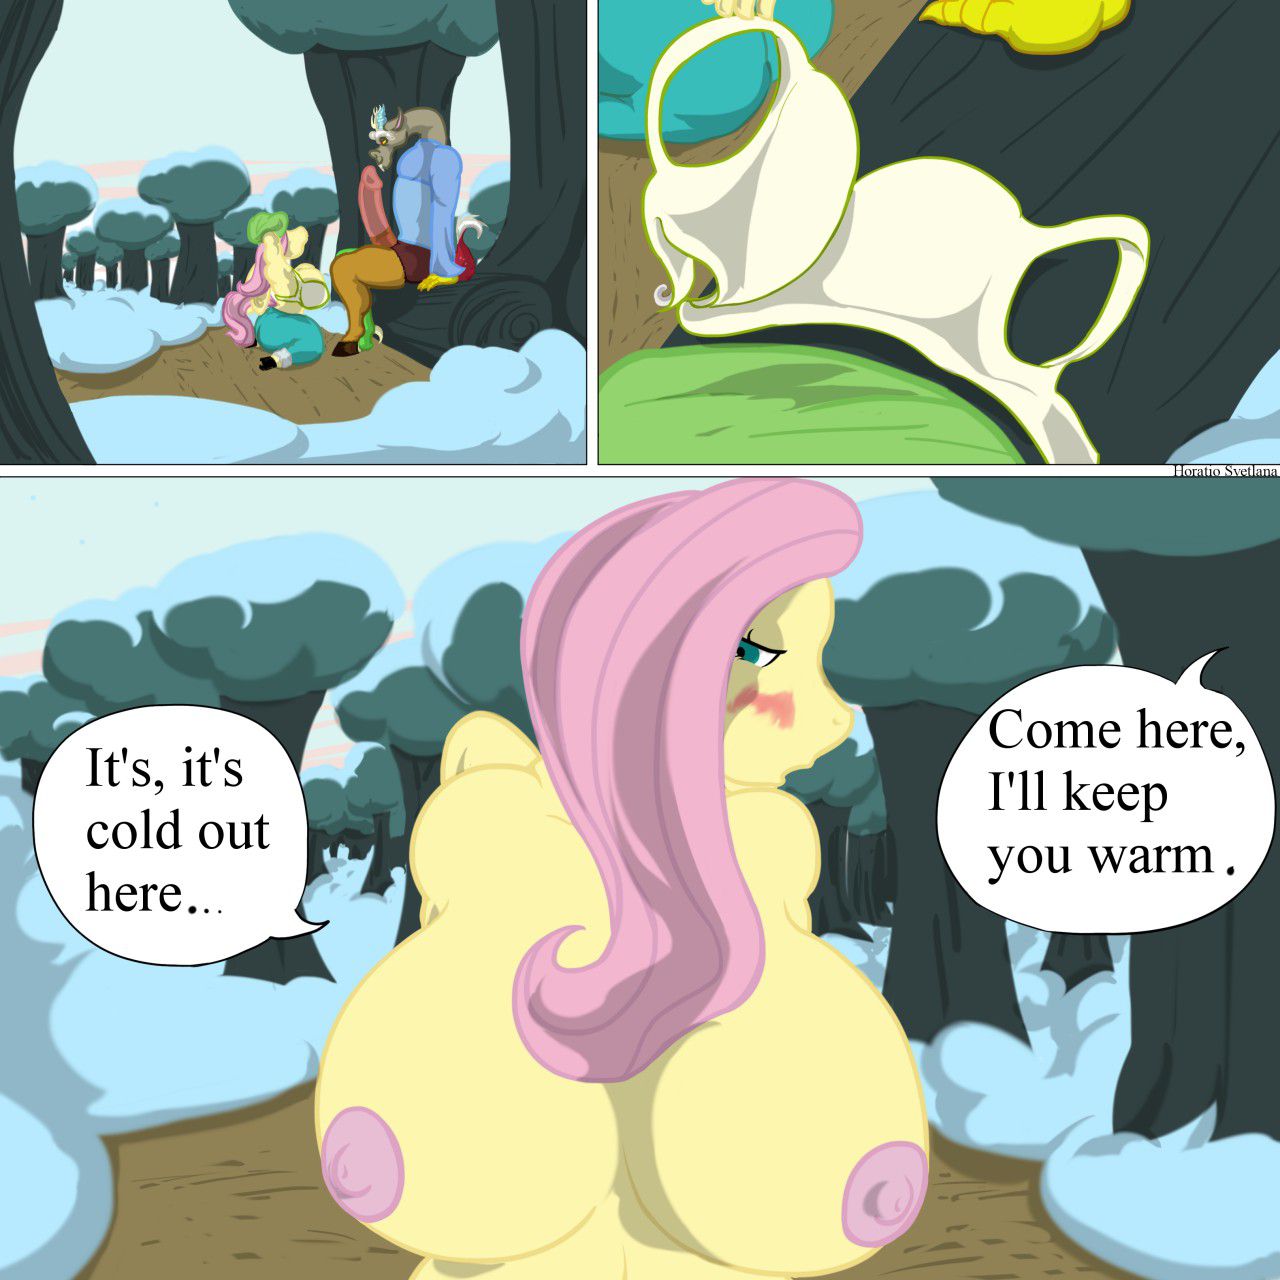 [Horatio Svetlana] Fluttershy's Discord Day (My Little Pony Friendship Is Magic) [Ongoing] 2